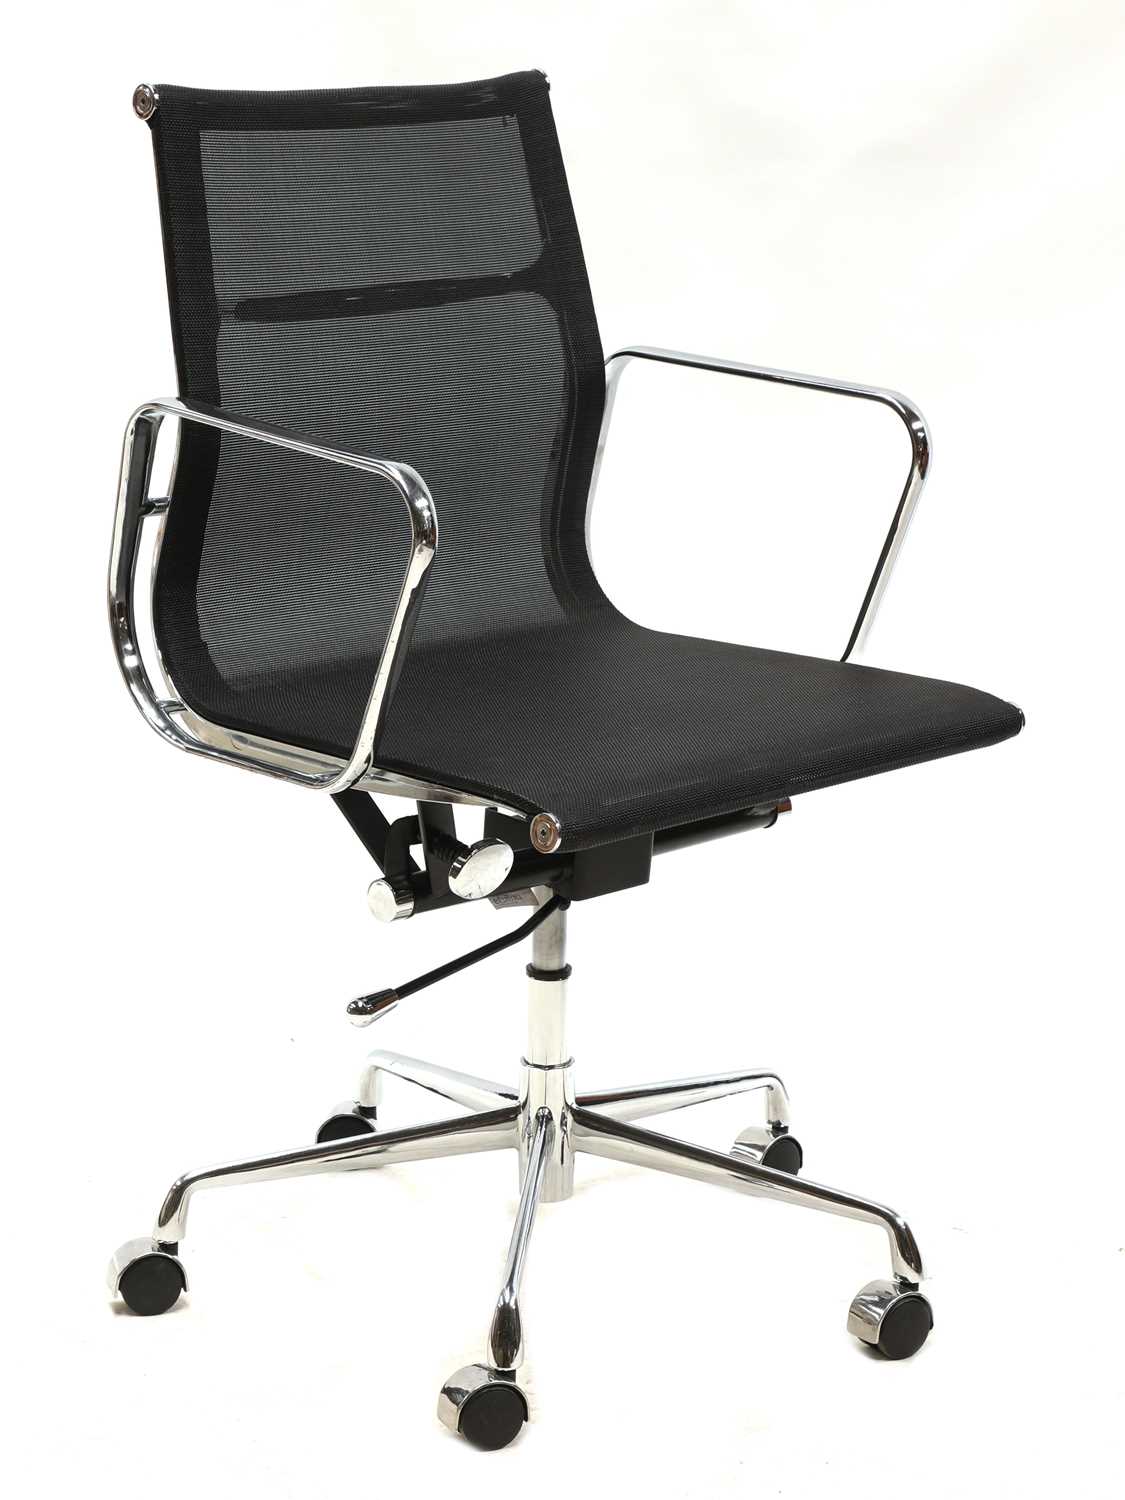 A black mesh and chrome office chair,